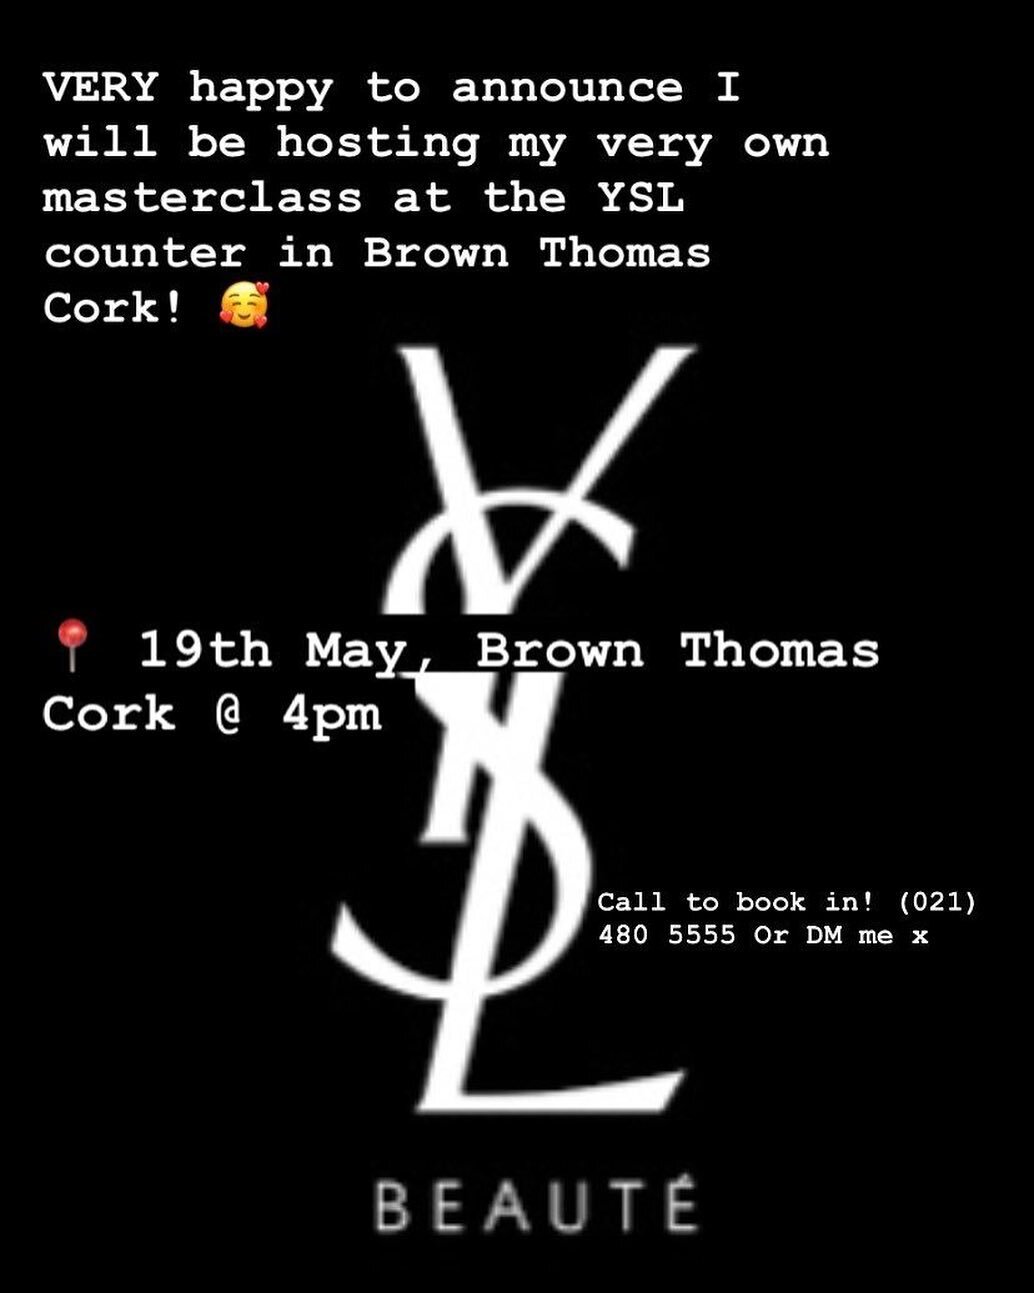 We are so proud of this talented past LCA pupil Lorena Dos Santos as she hosts her very own Yves Saint Laurent make up masterclass at the YSL counter of Brown Thomas this Friday 19th of March at 4pm! We always knew she would go onto so great things! 